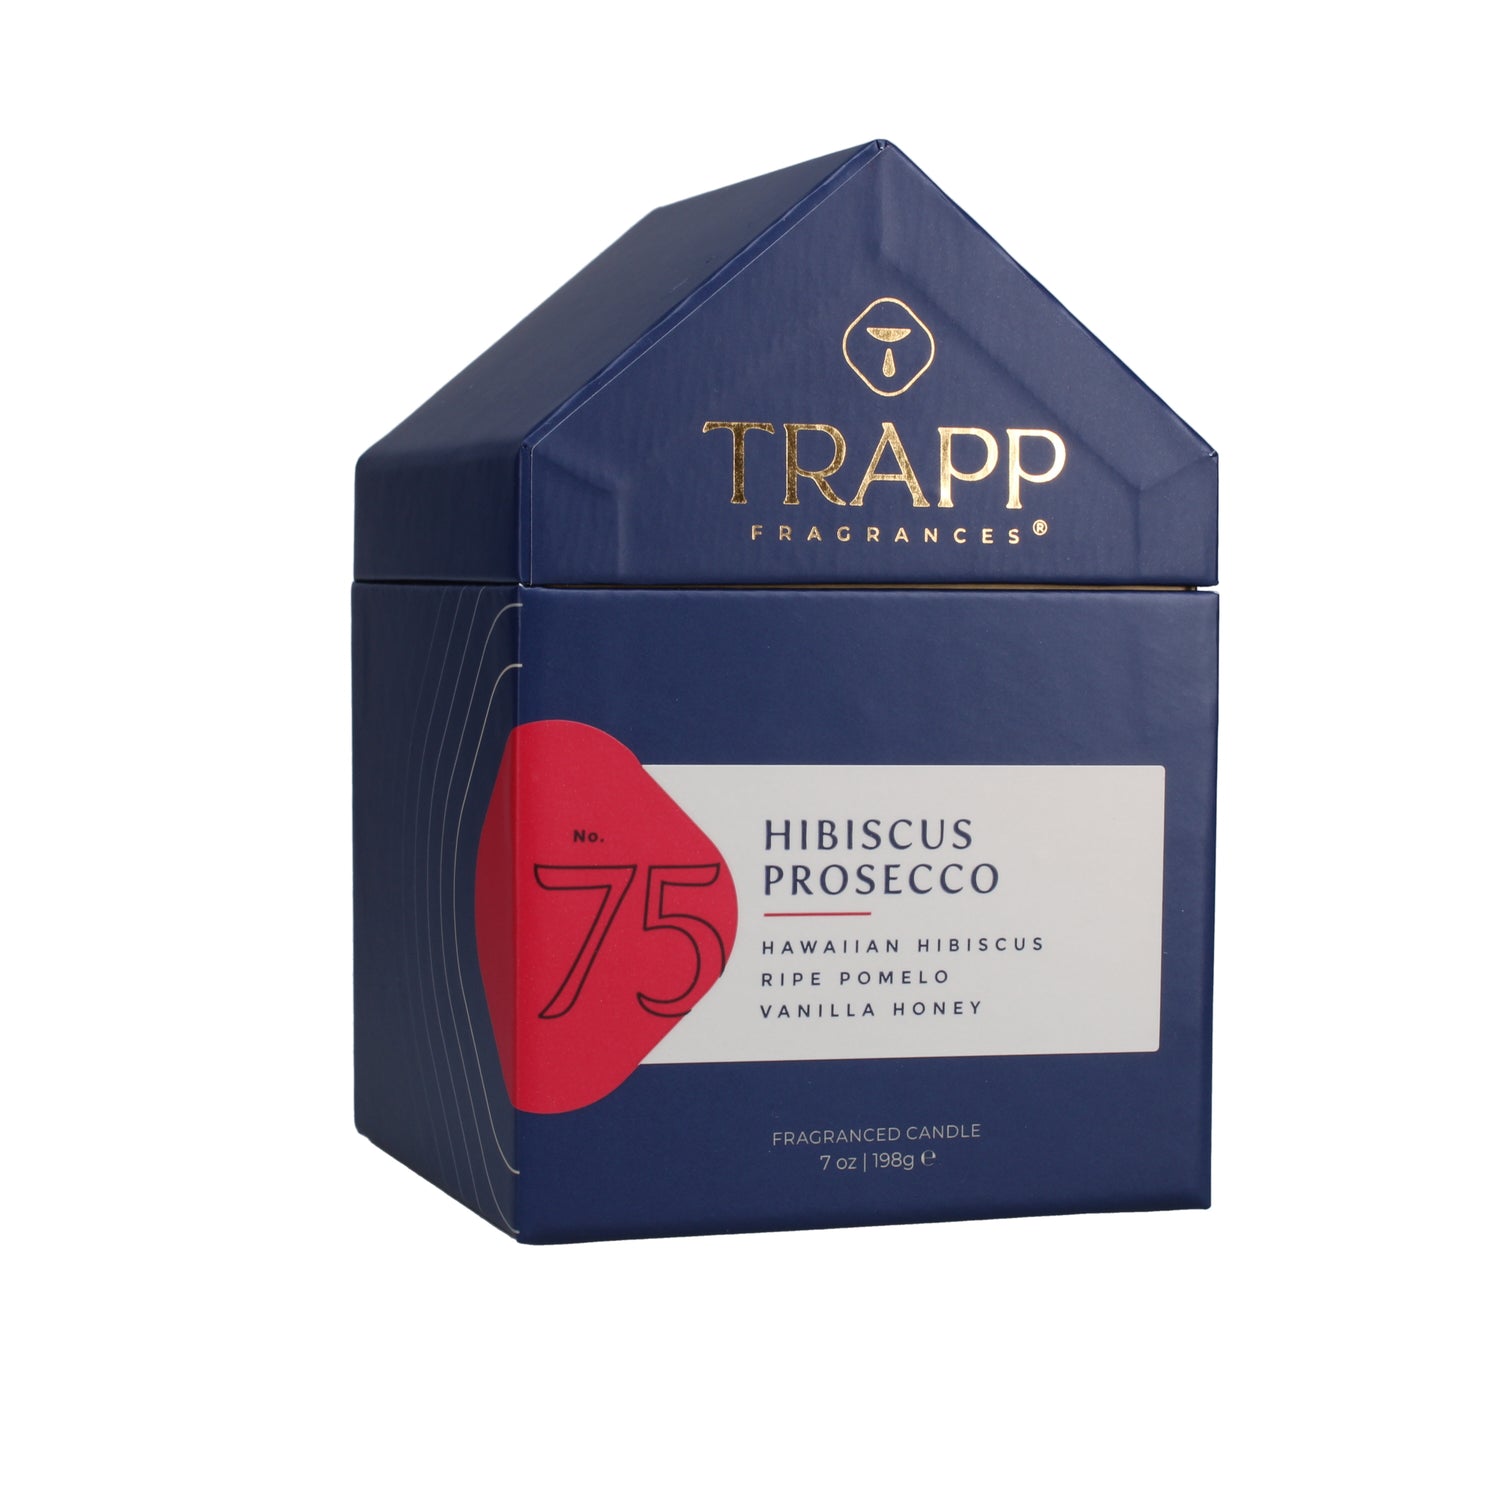 No. 75 Hibiscus Prosecco 7 oz. Candle in House Box Image 7